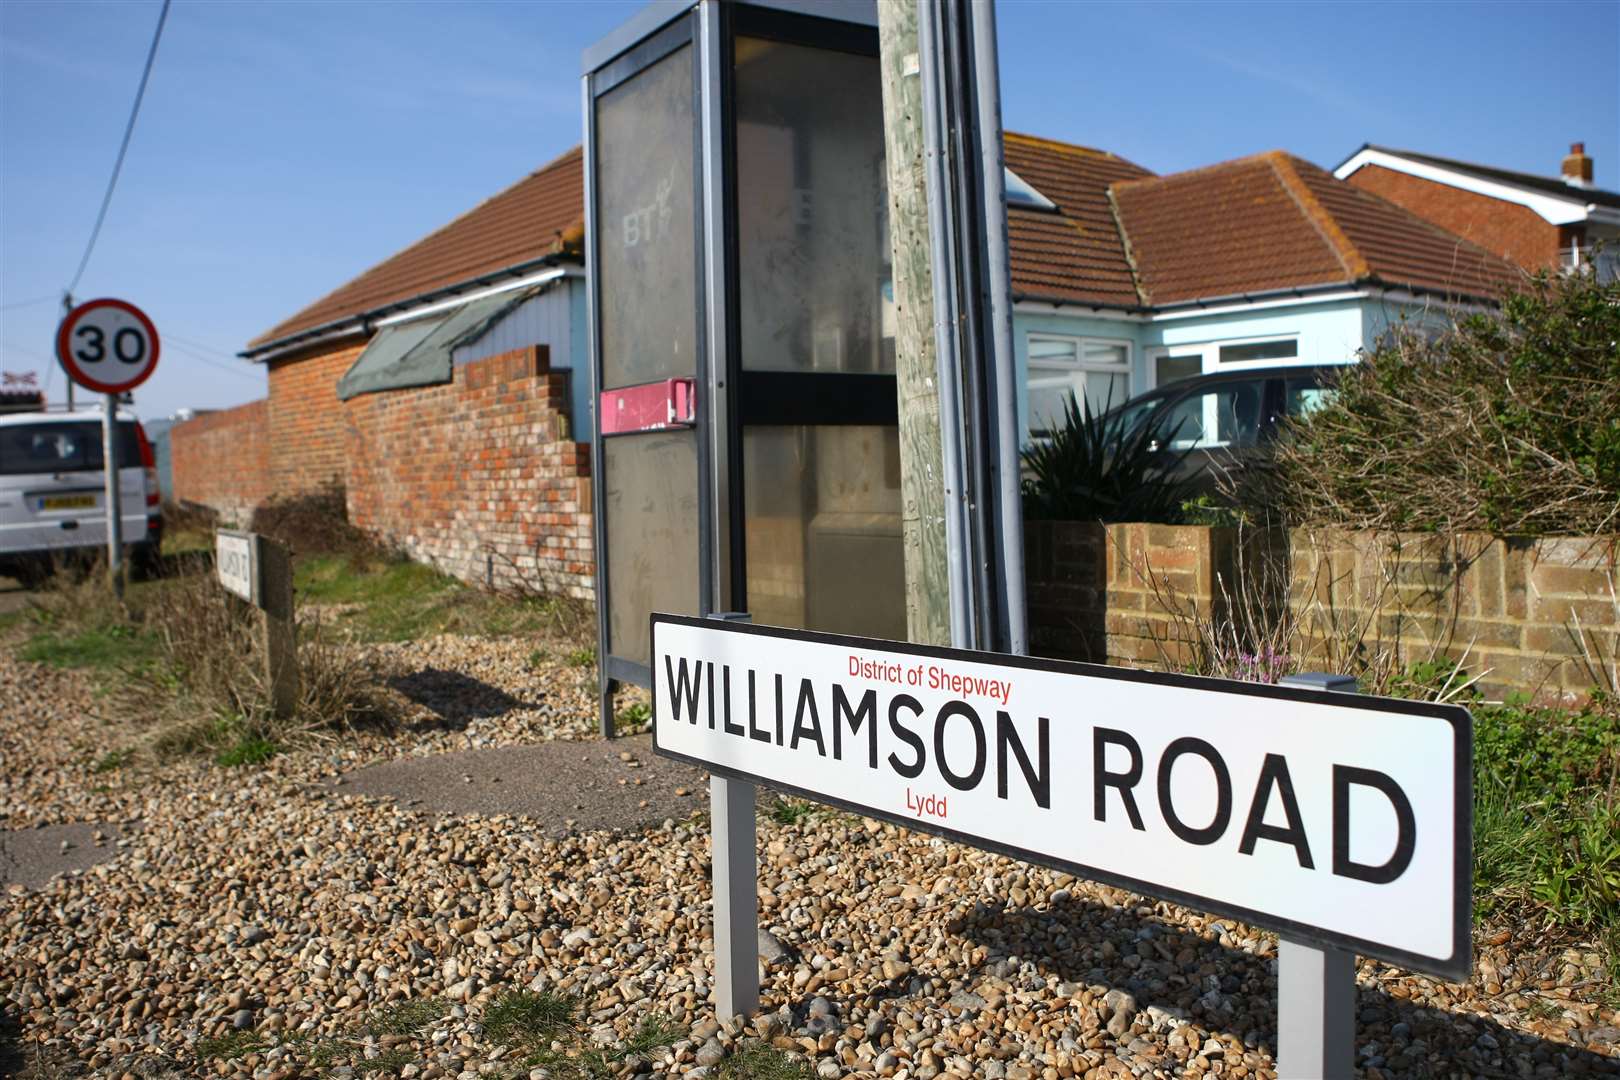 Williamson Road, in Lydd on Sea, was named as having the slowest broadband in the country last month